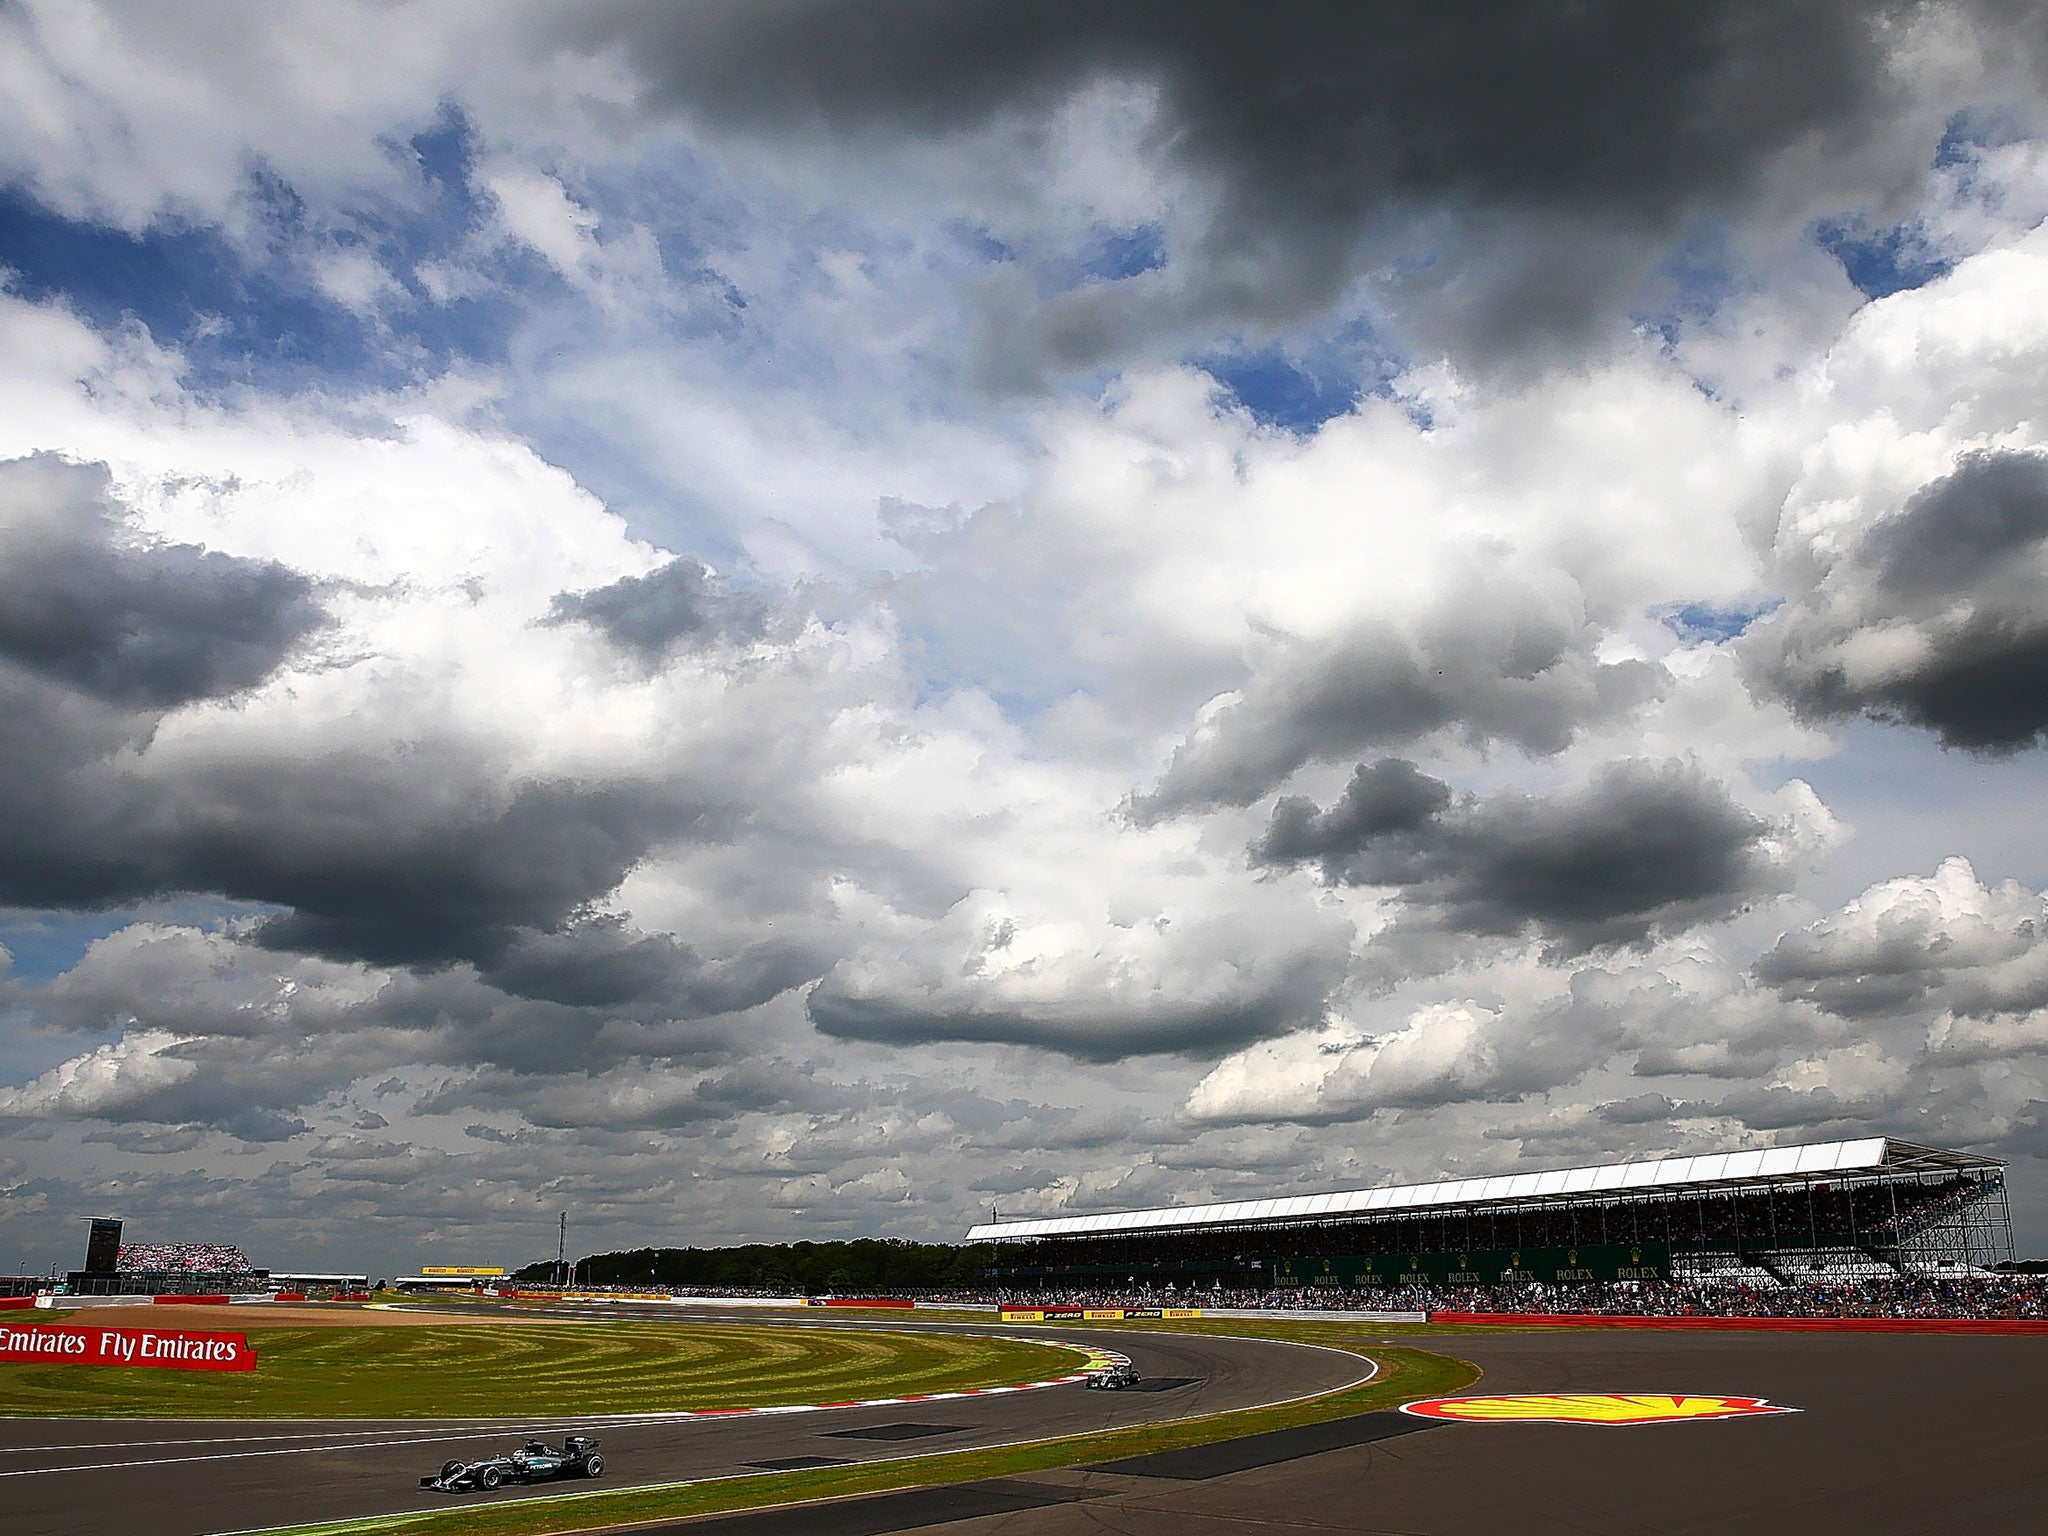 The clouds gather over Silverstone during the British Grand Prix this summer